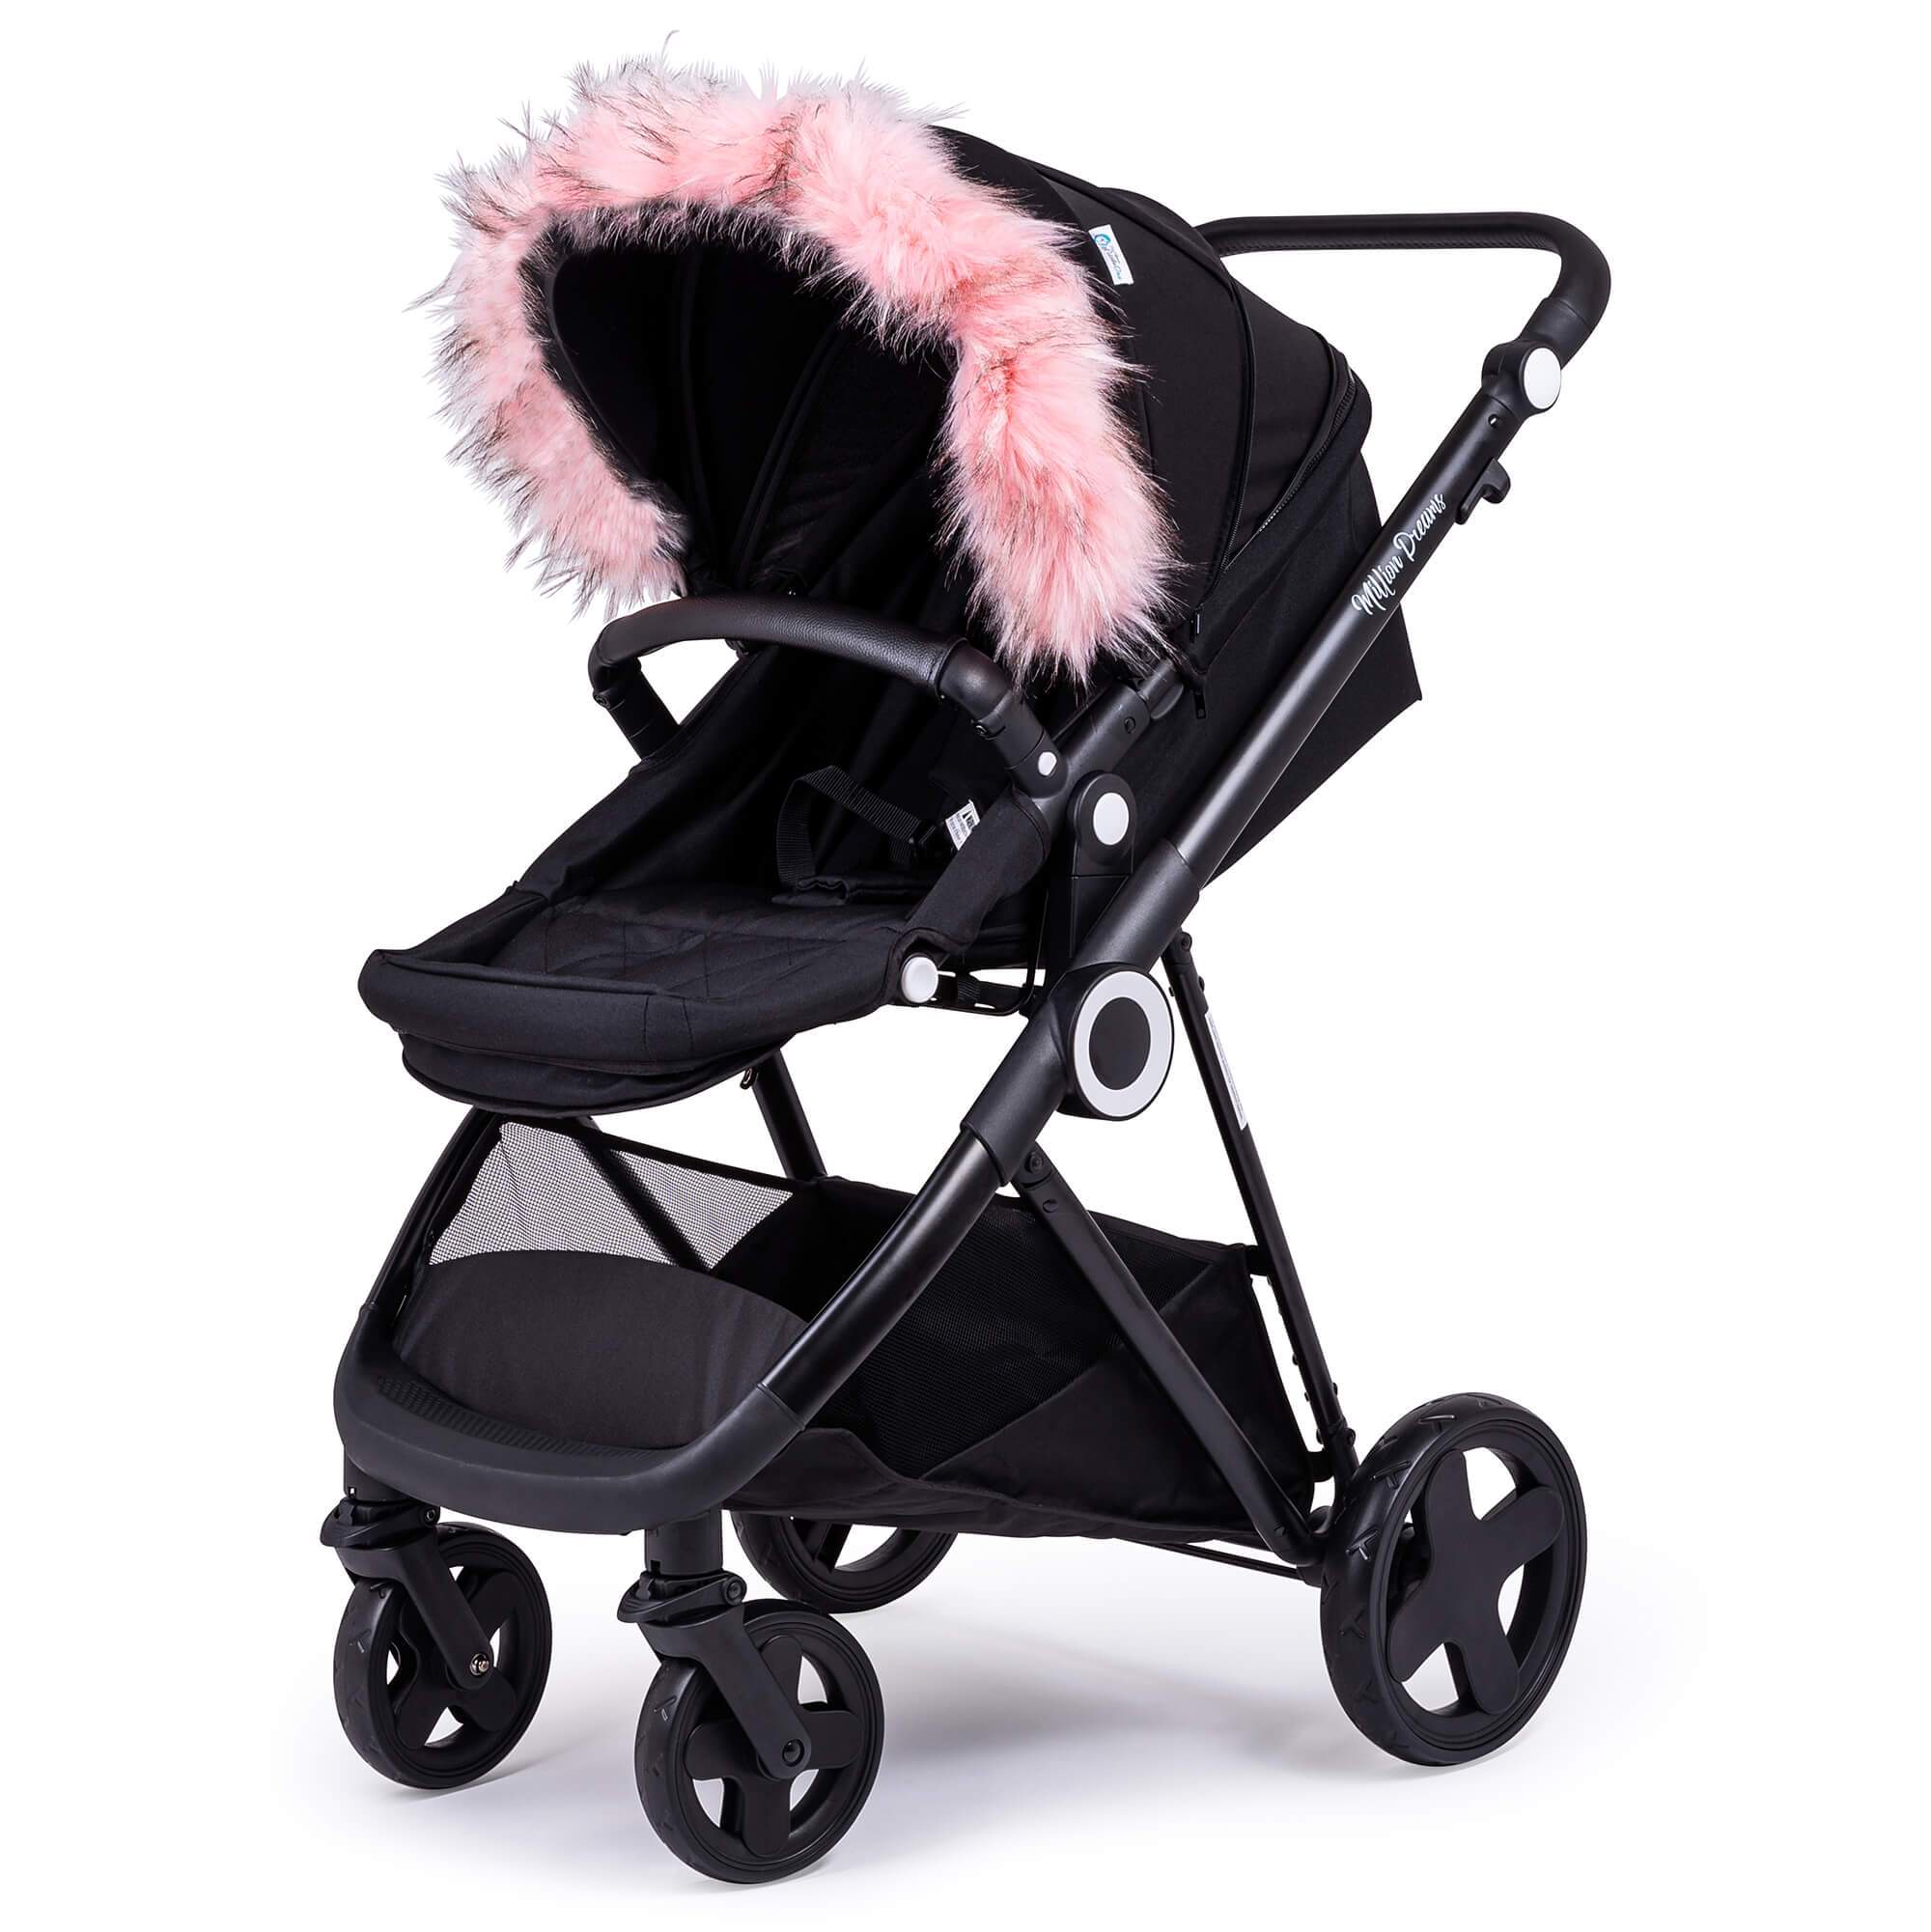 Pram Fur Hood Trim Attachment For Pushchair Compatible with Tutti Bambini - Light Pink / Fits All Models | For Your Little One